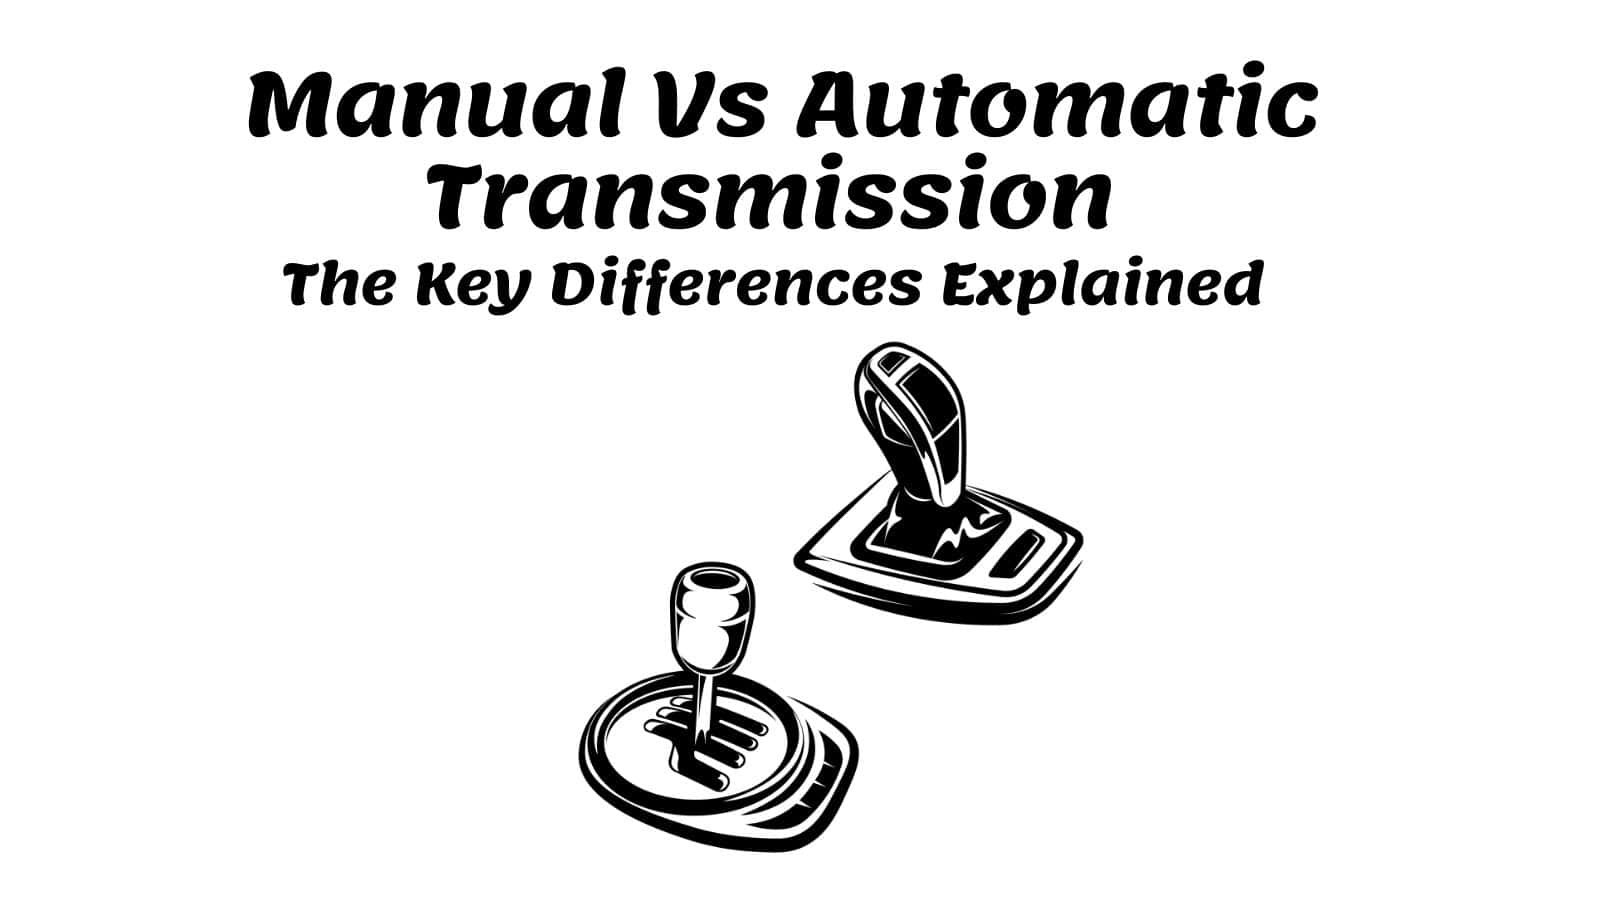 Manual Vs Automatic Transmission - The Key Differences Explained